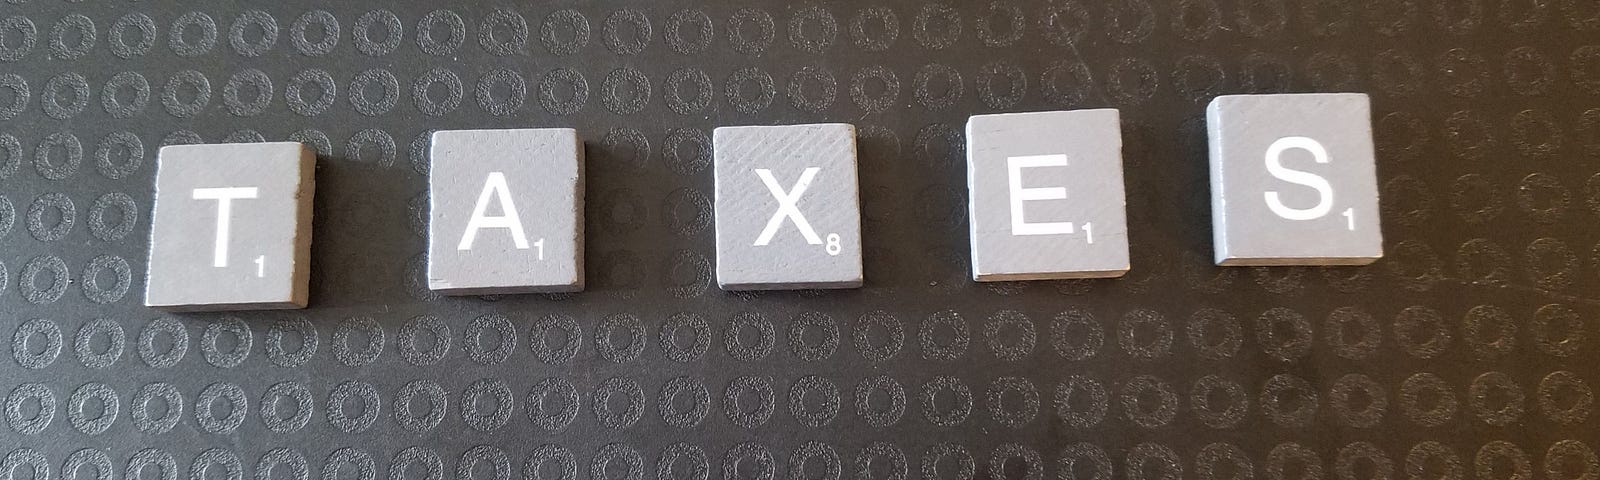 Grey wooden letter tiles on a black background. Letters spell TAXES.